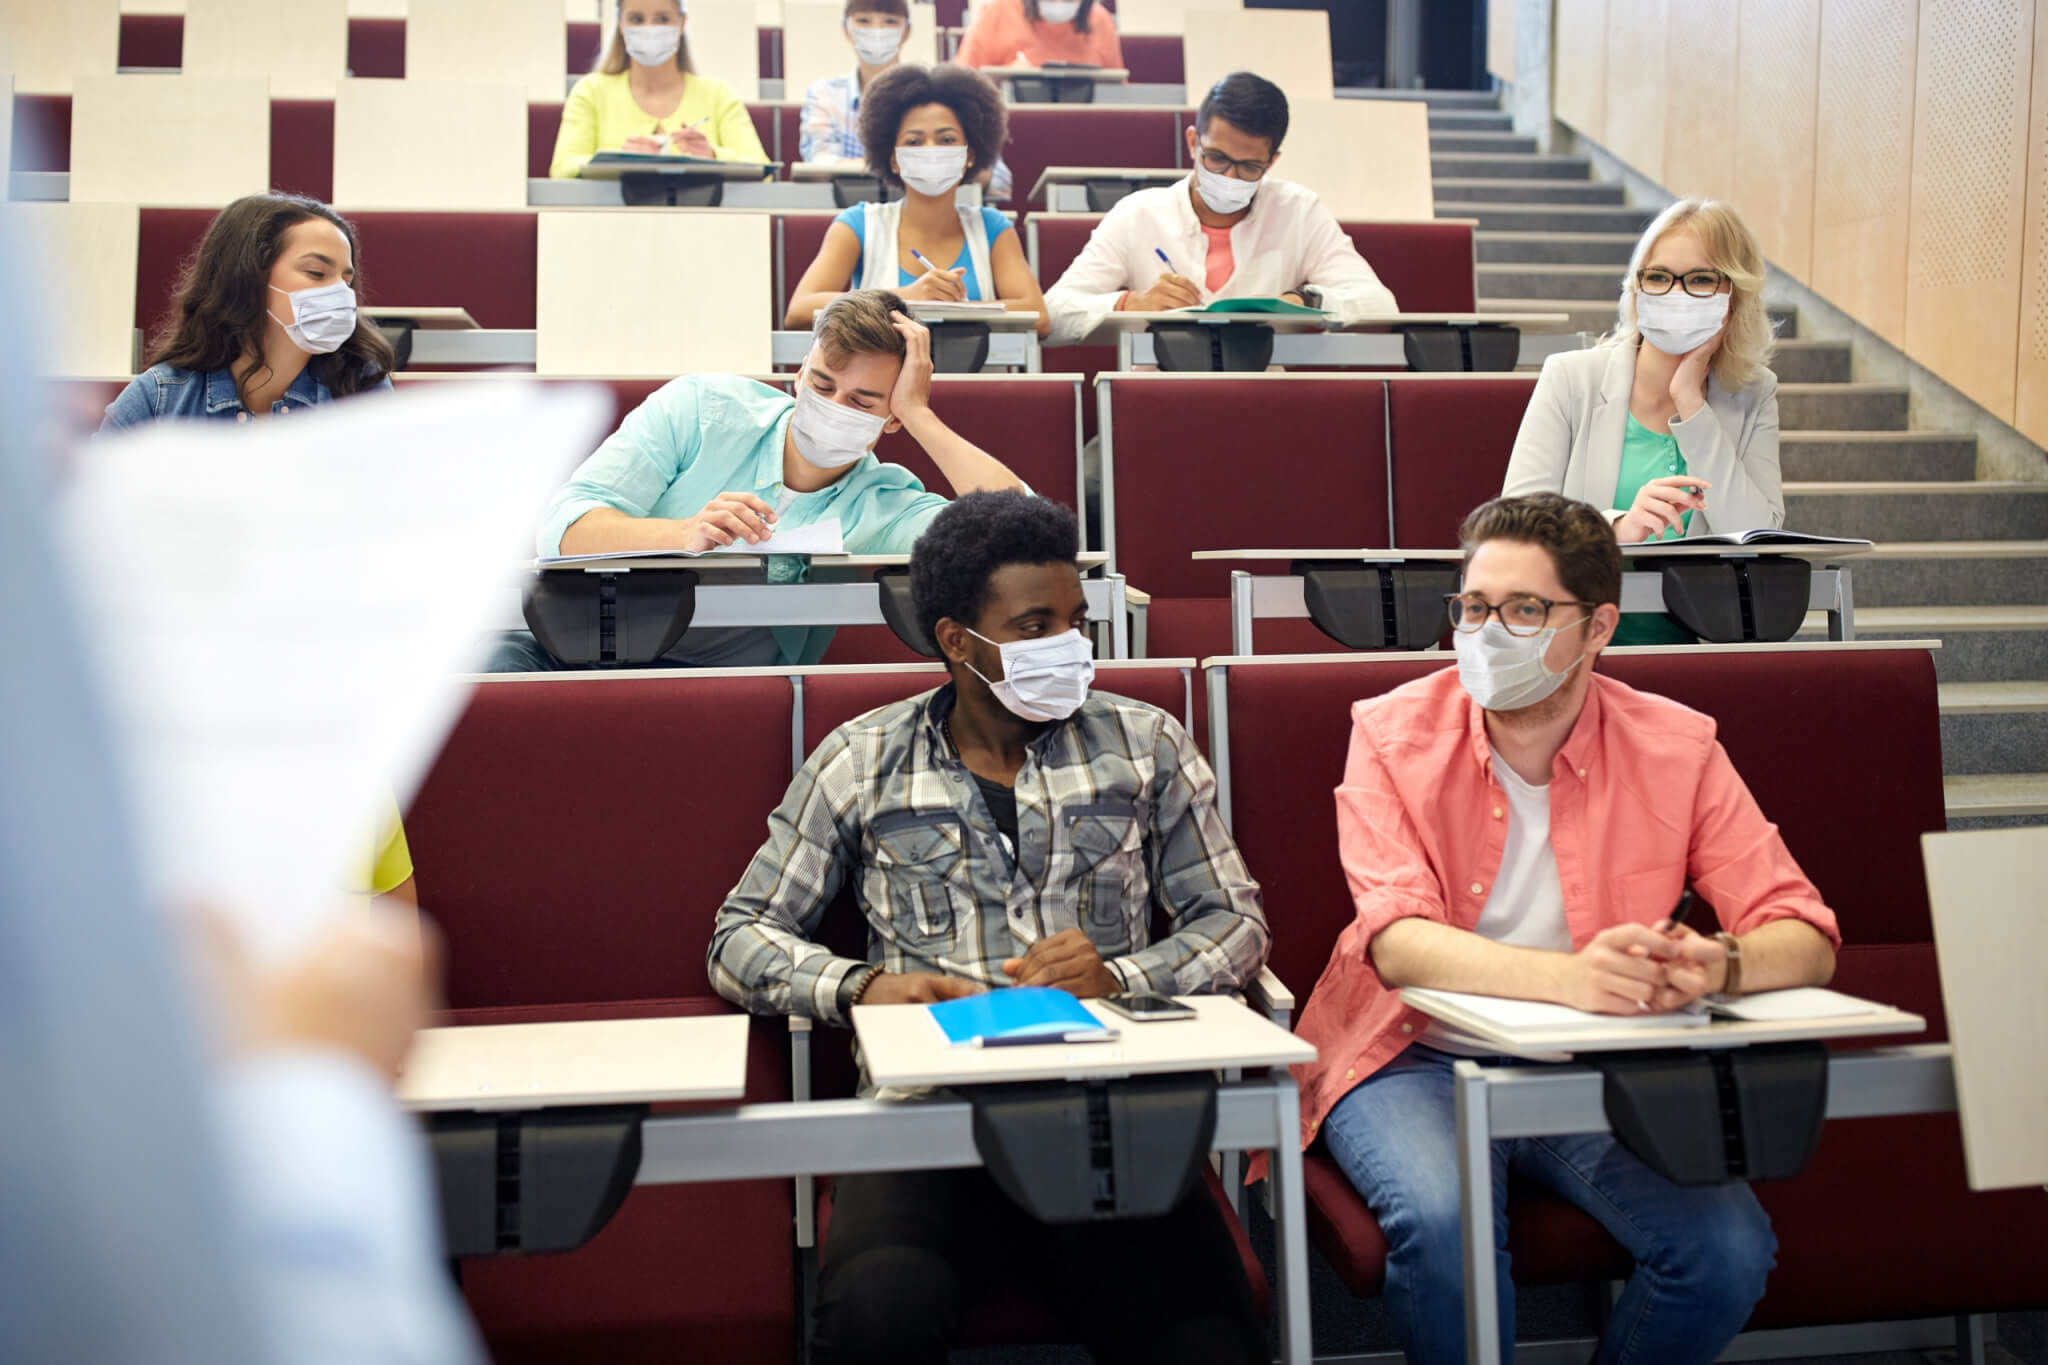 College students wearing masks during lecture for coronavirus / COVID-19 protections